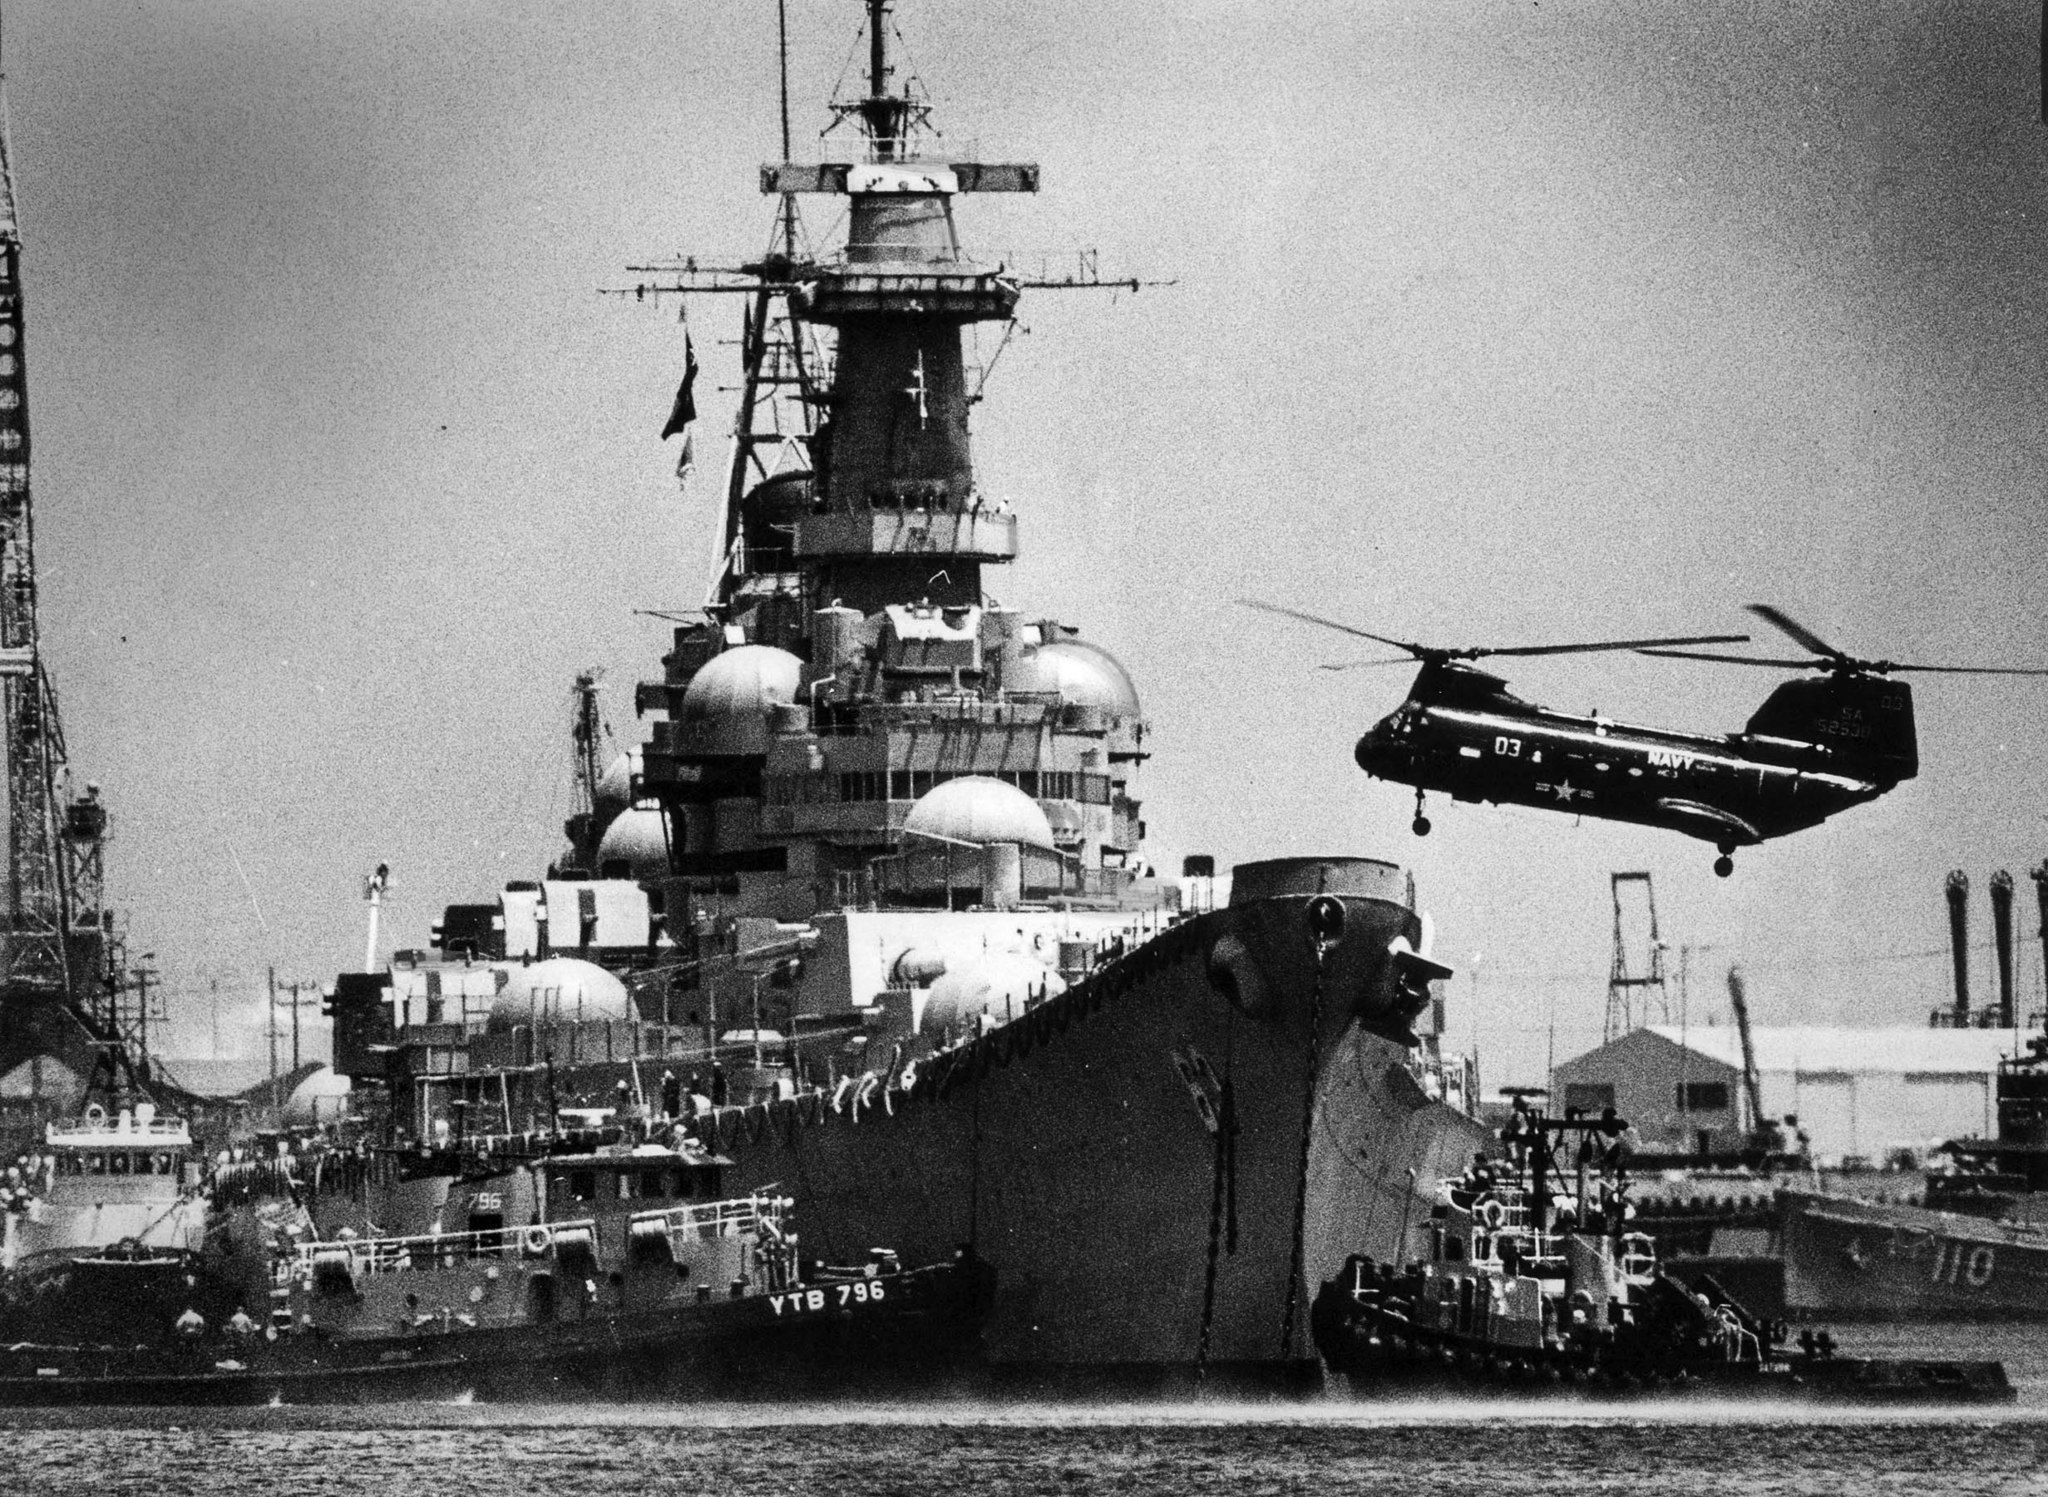 From the Archives: The battleship Missouri returns to Long Beach Angeles Times